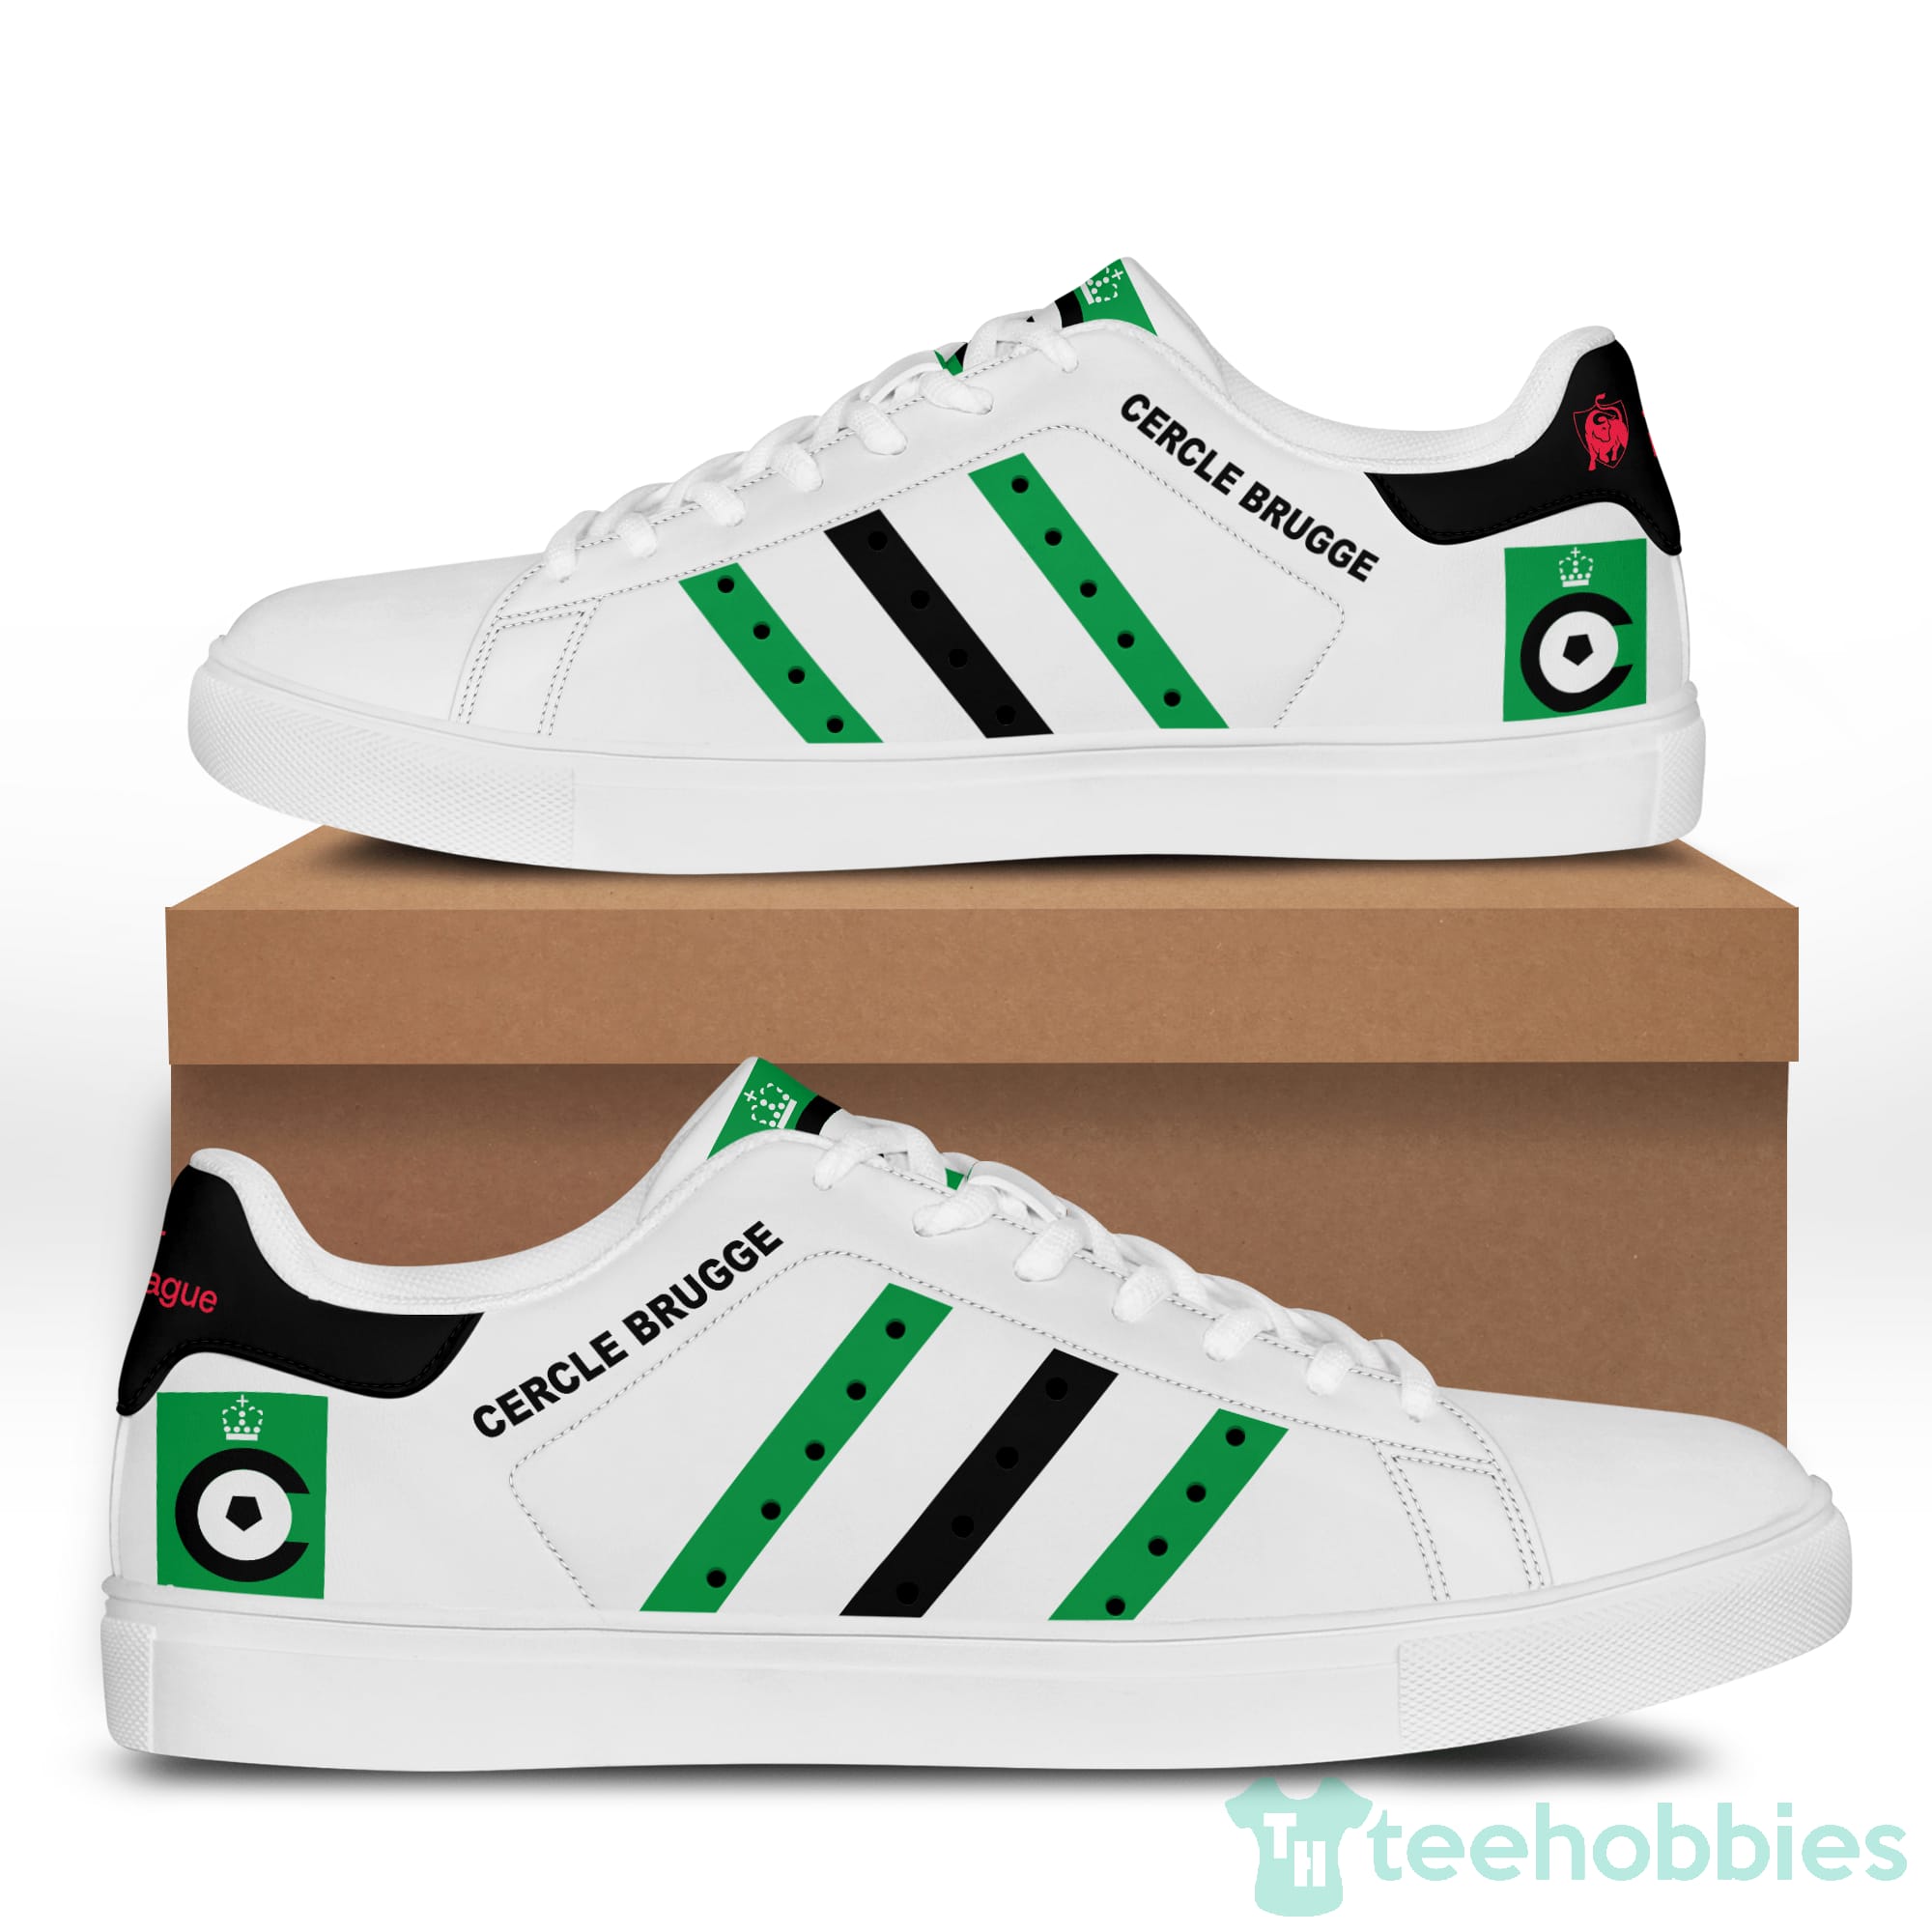 Cercle Brugge K.S White Low Top Skate Shoes Product photo 1